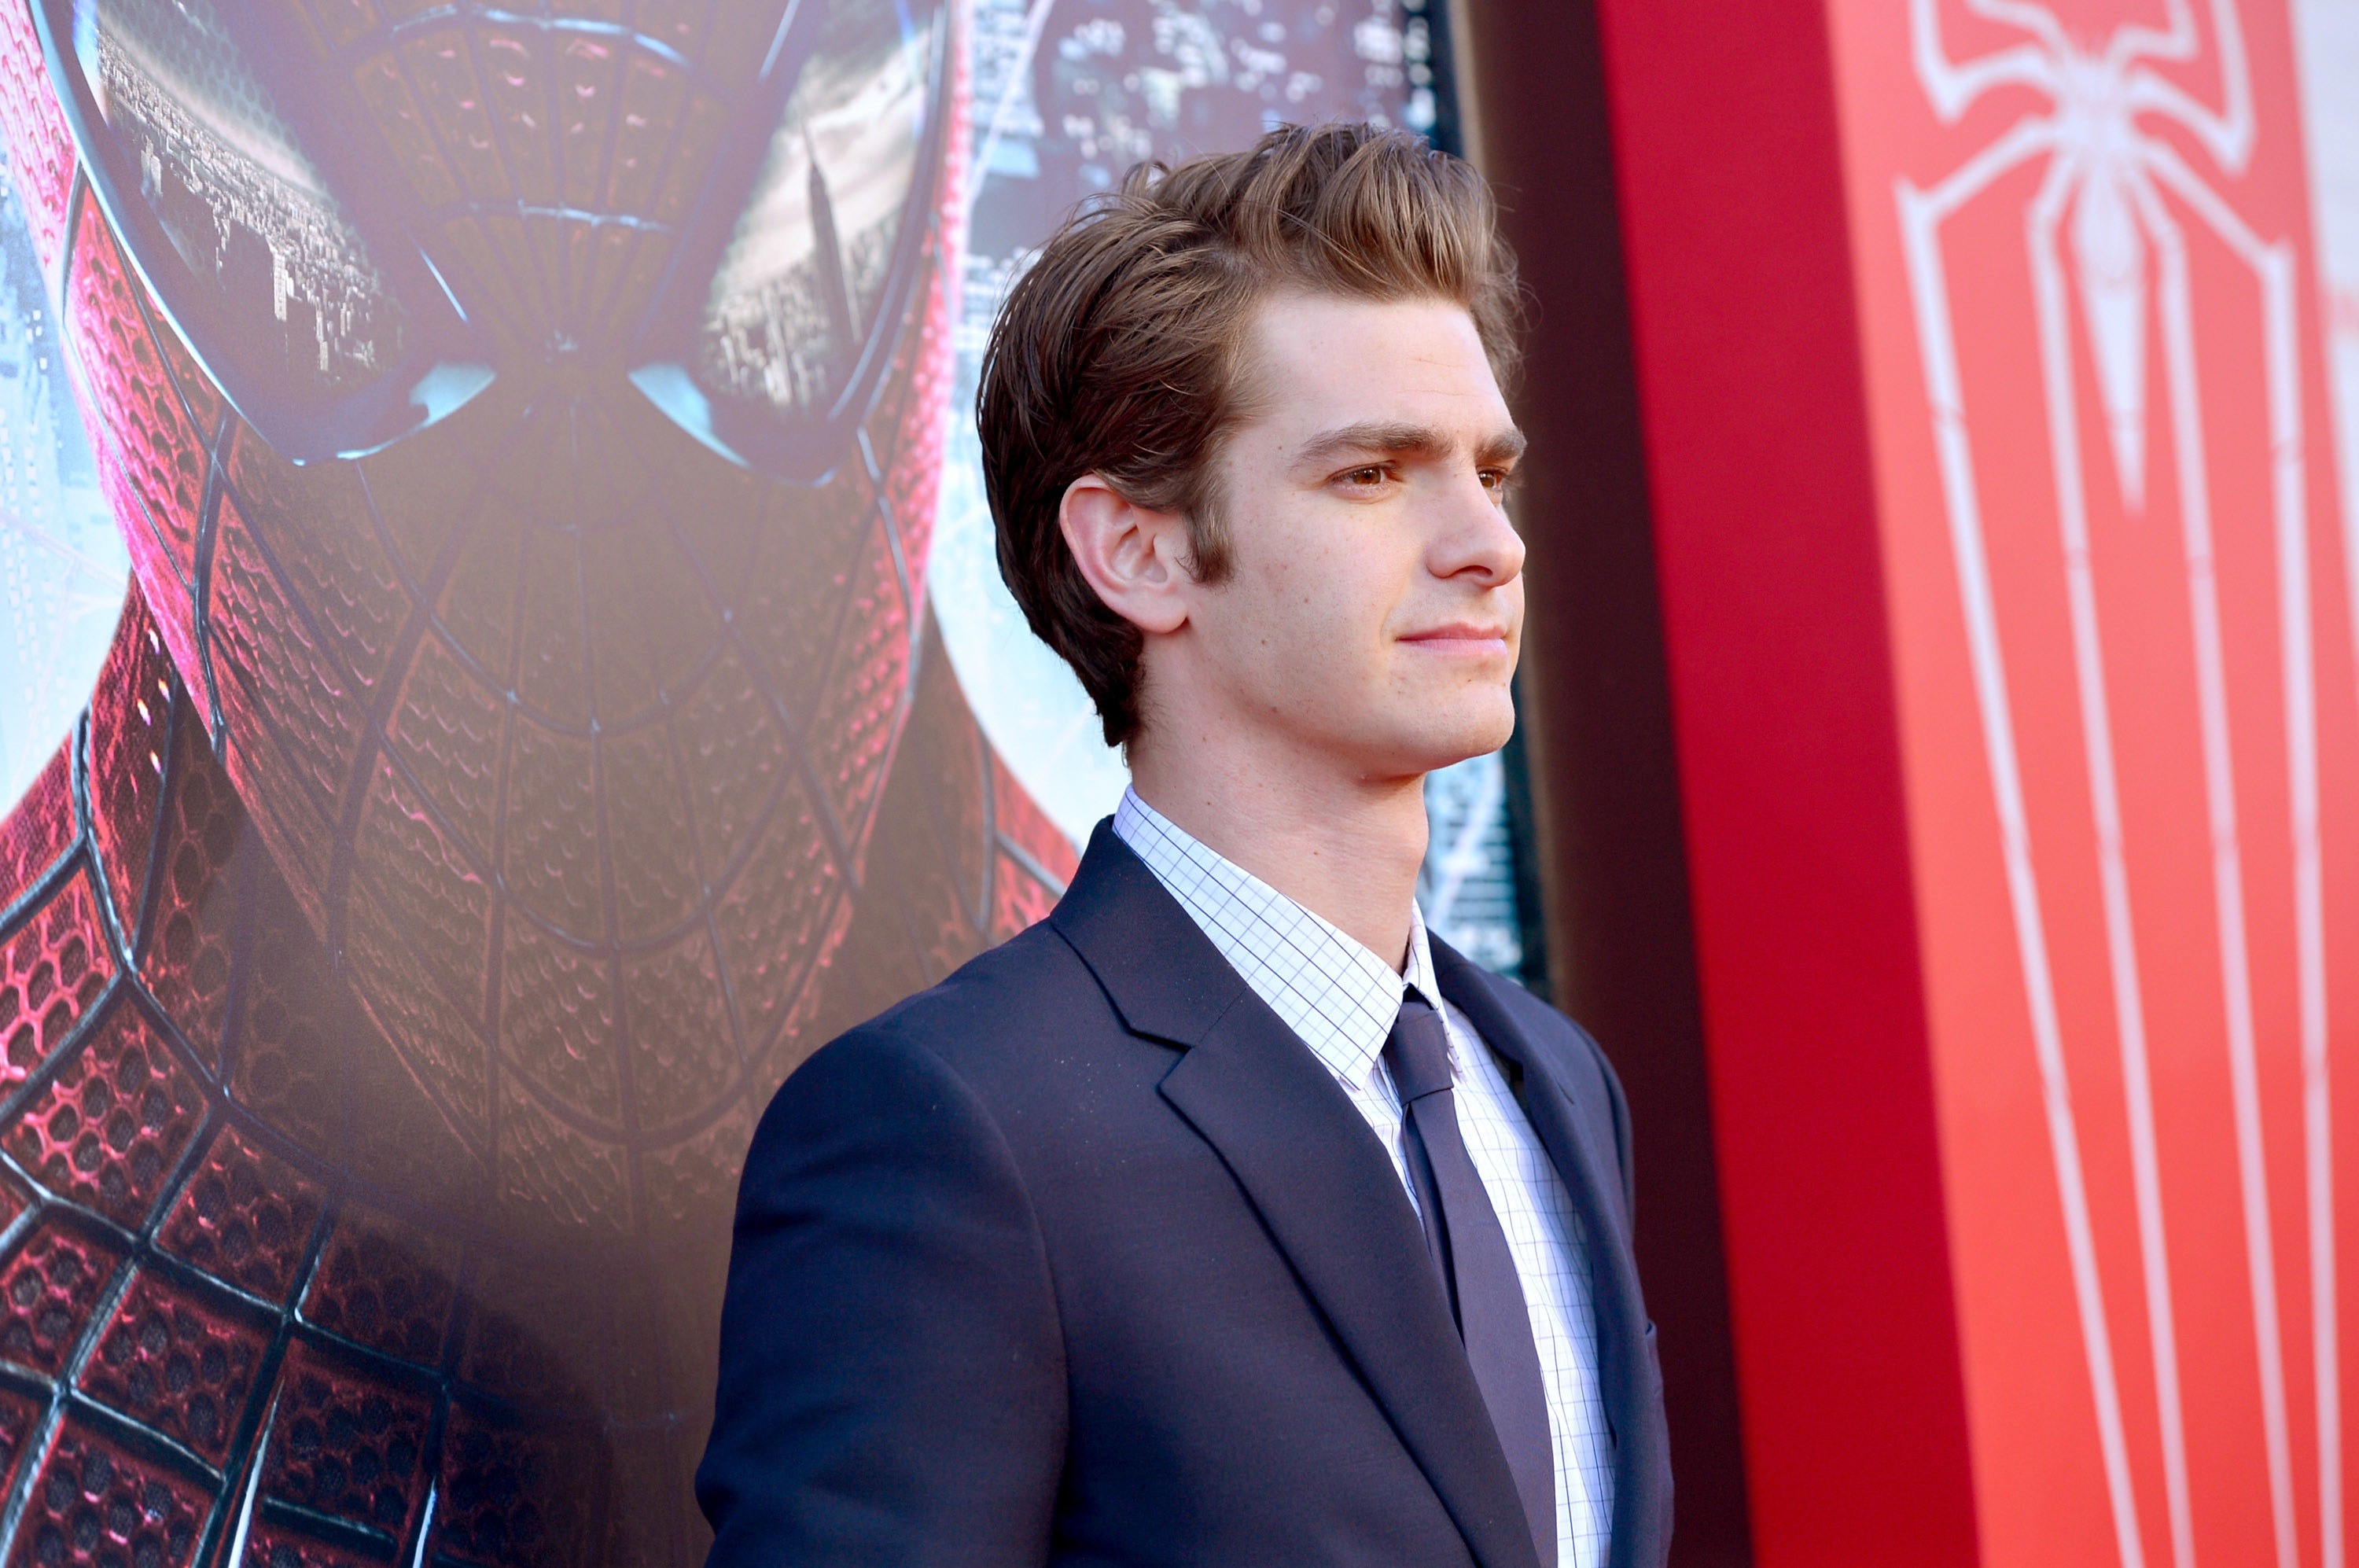 Close-up of Andrew in a suit and tie